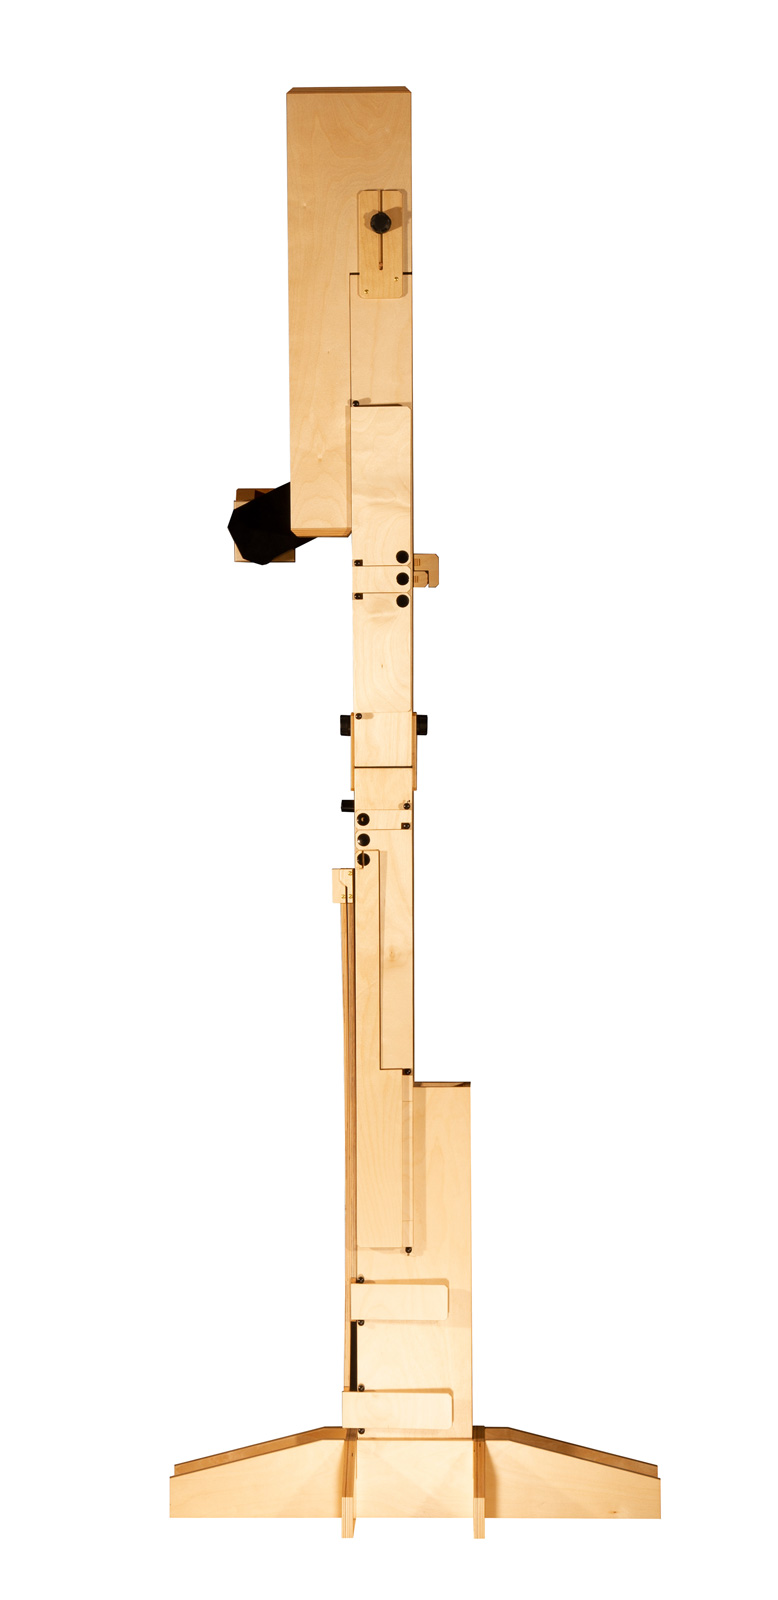 Paetzold by Kunath, subcontrabass in F, "Master", "Direct-Blow", 442 Hz, natural, birch plywood